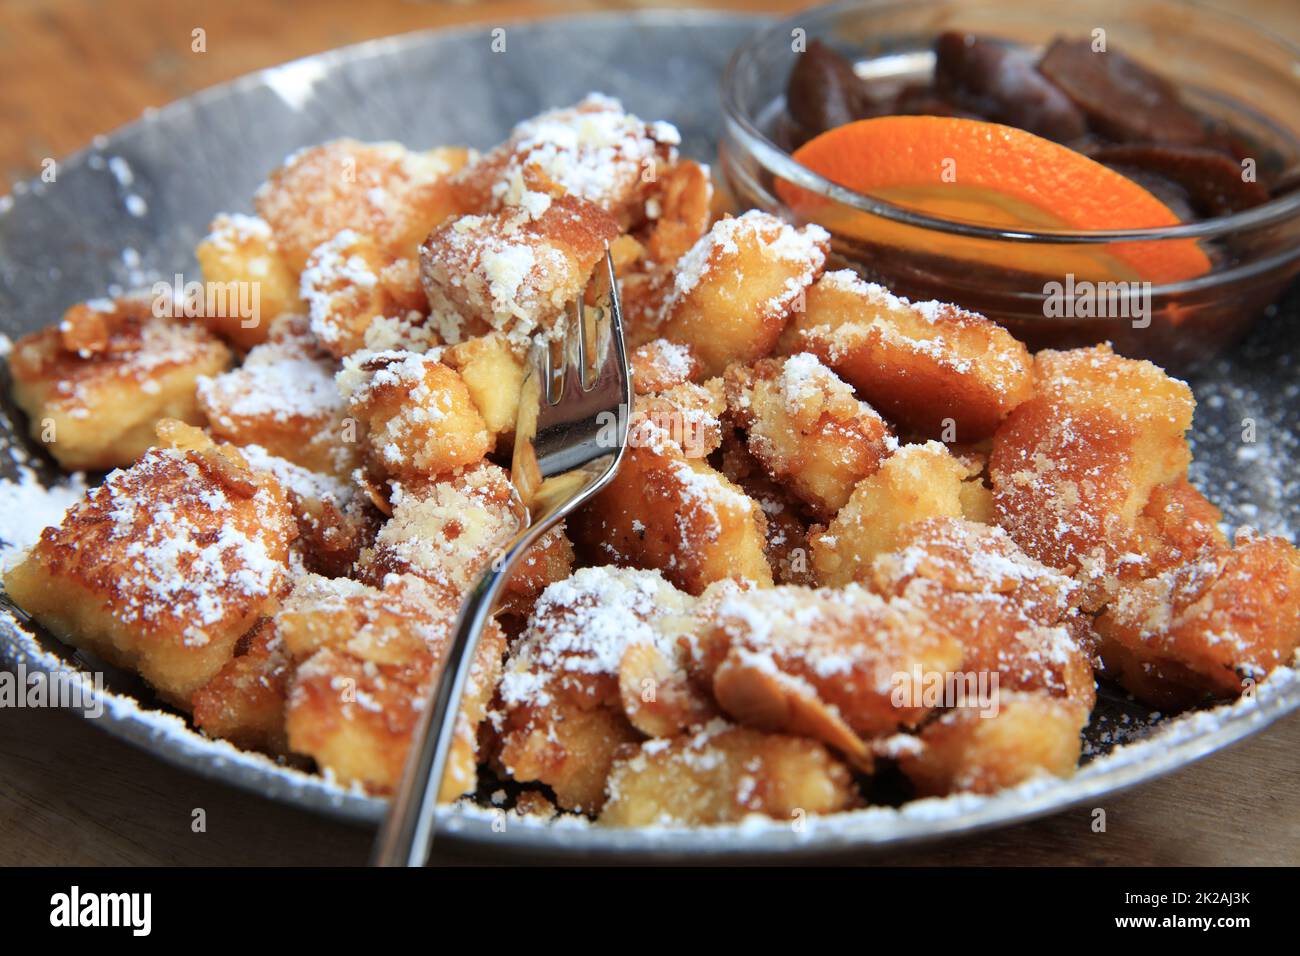 Sugared Pancake with Plums called Kaiserschmarrn. Germany Stock Photo